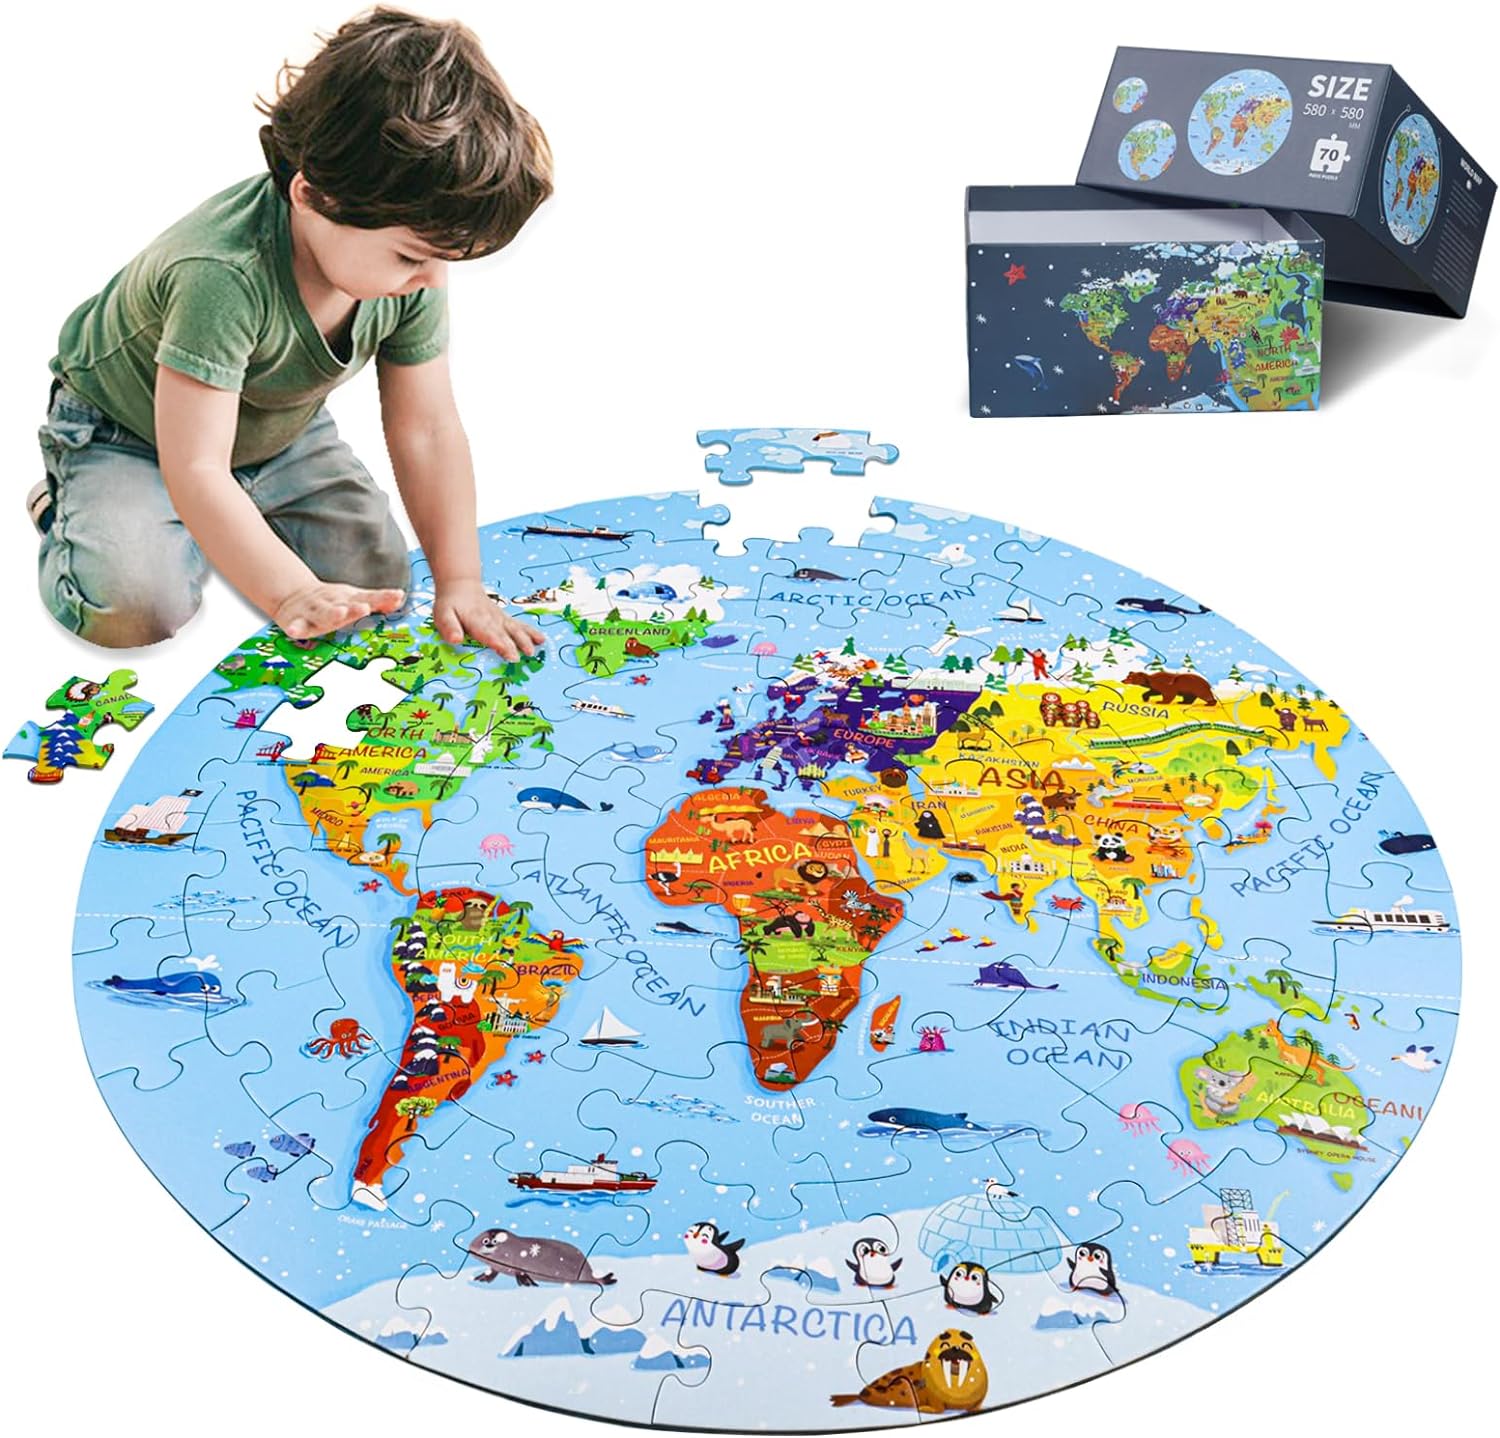 You are currently viewing DIGOBAY World Map Jigsaw Puzzle Review